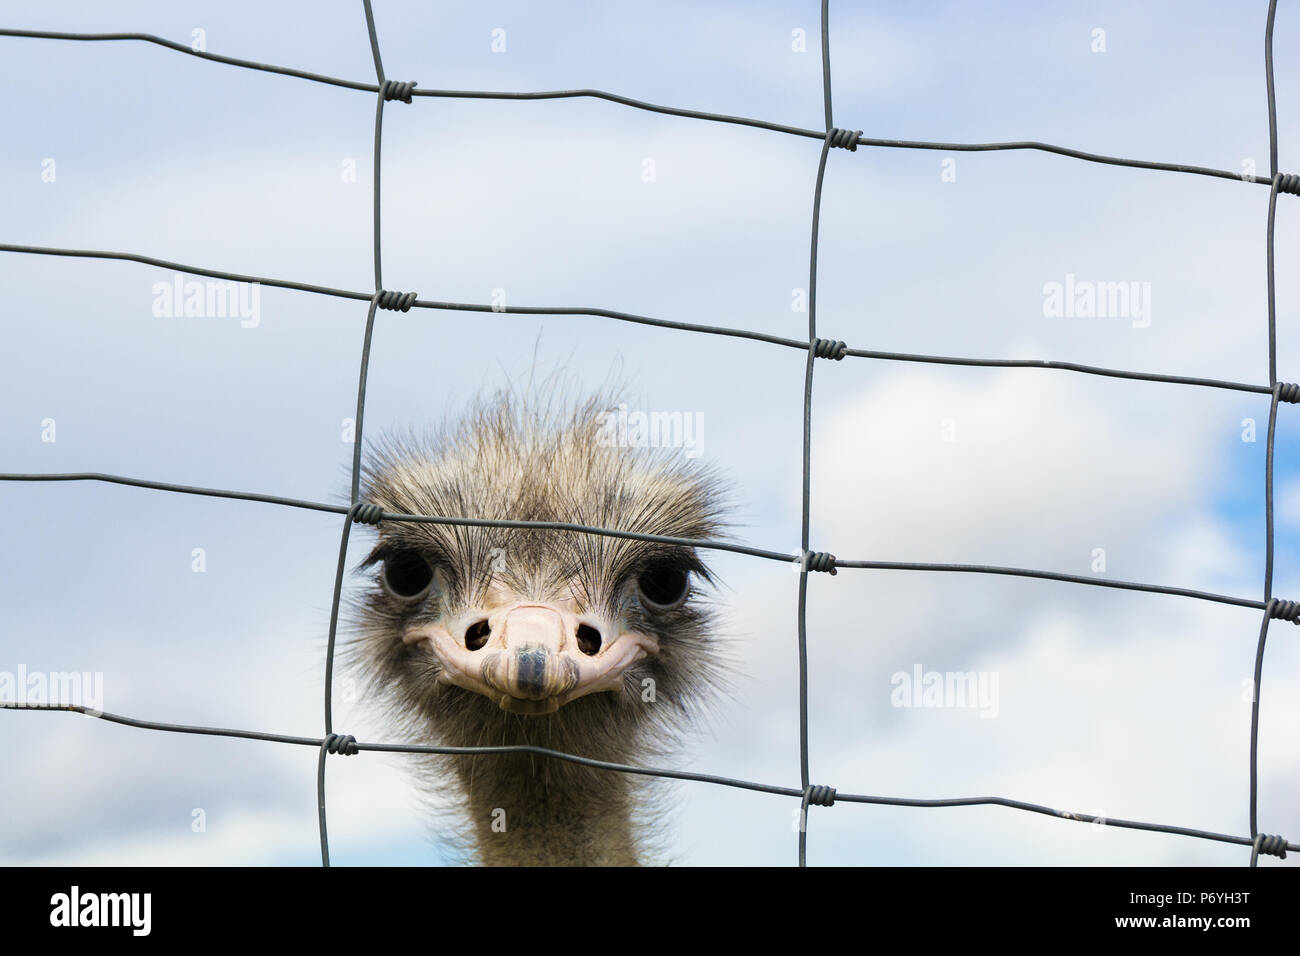 Lonesome ostrich looking firmly towards behind metallic string fence Stock Photo